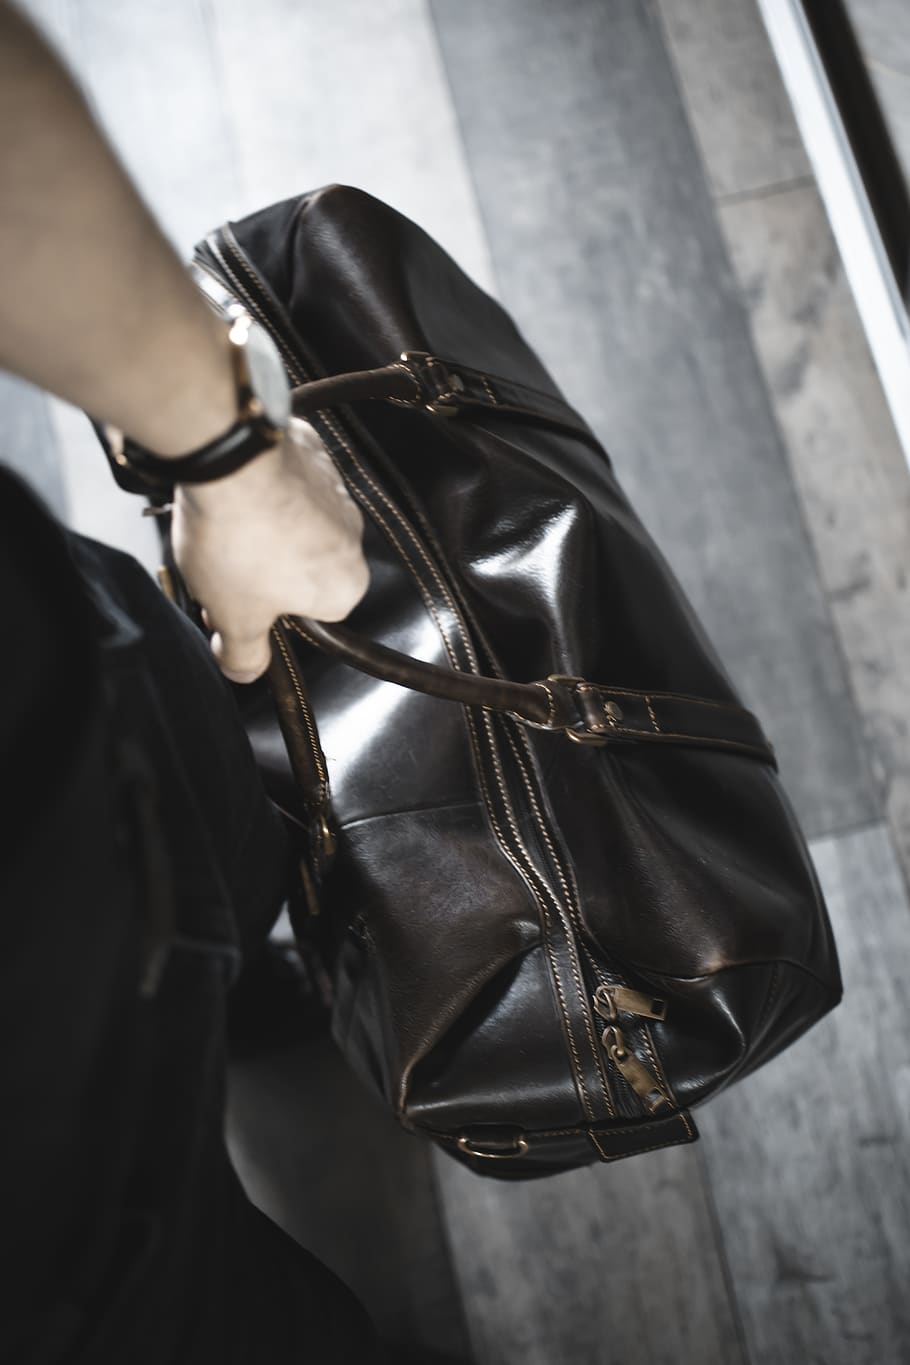 person holding brown leather handbag, accessory, accessories